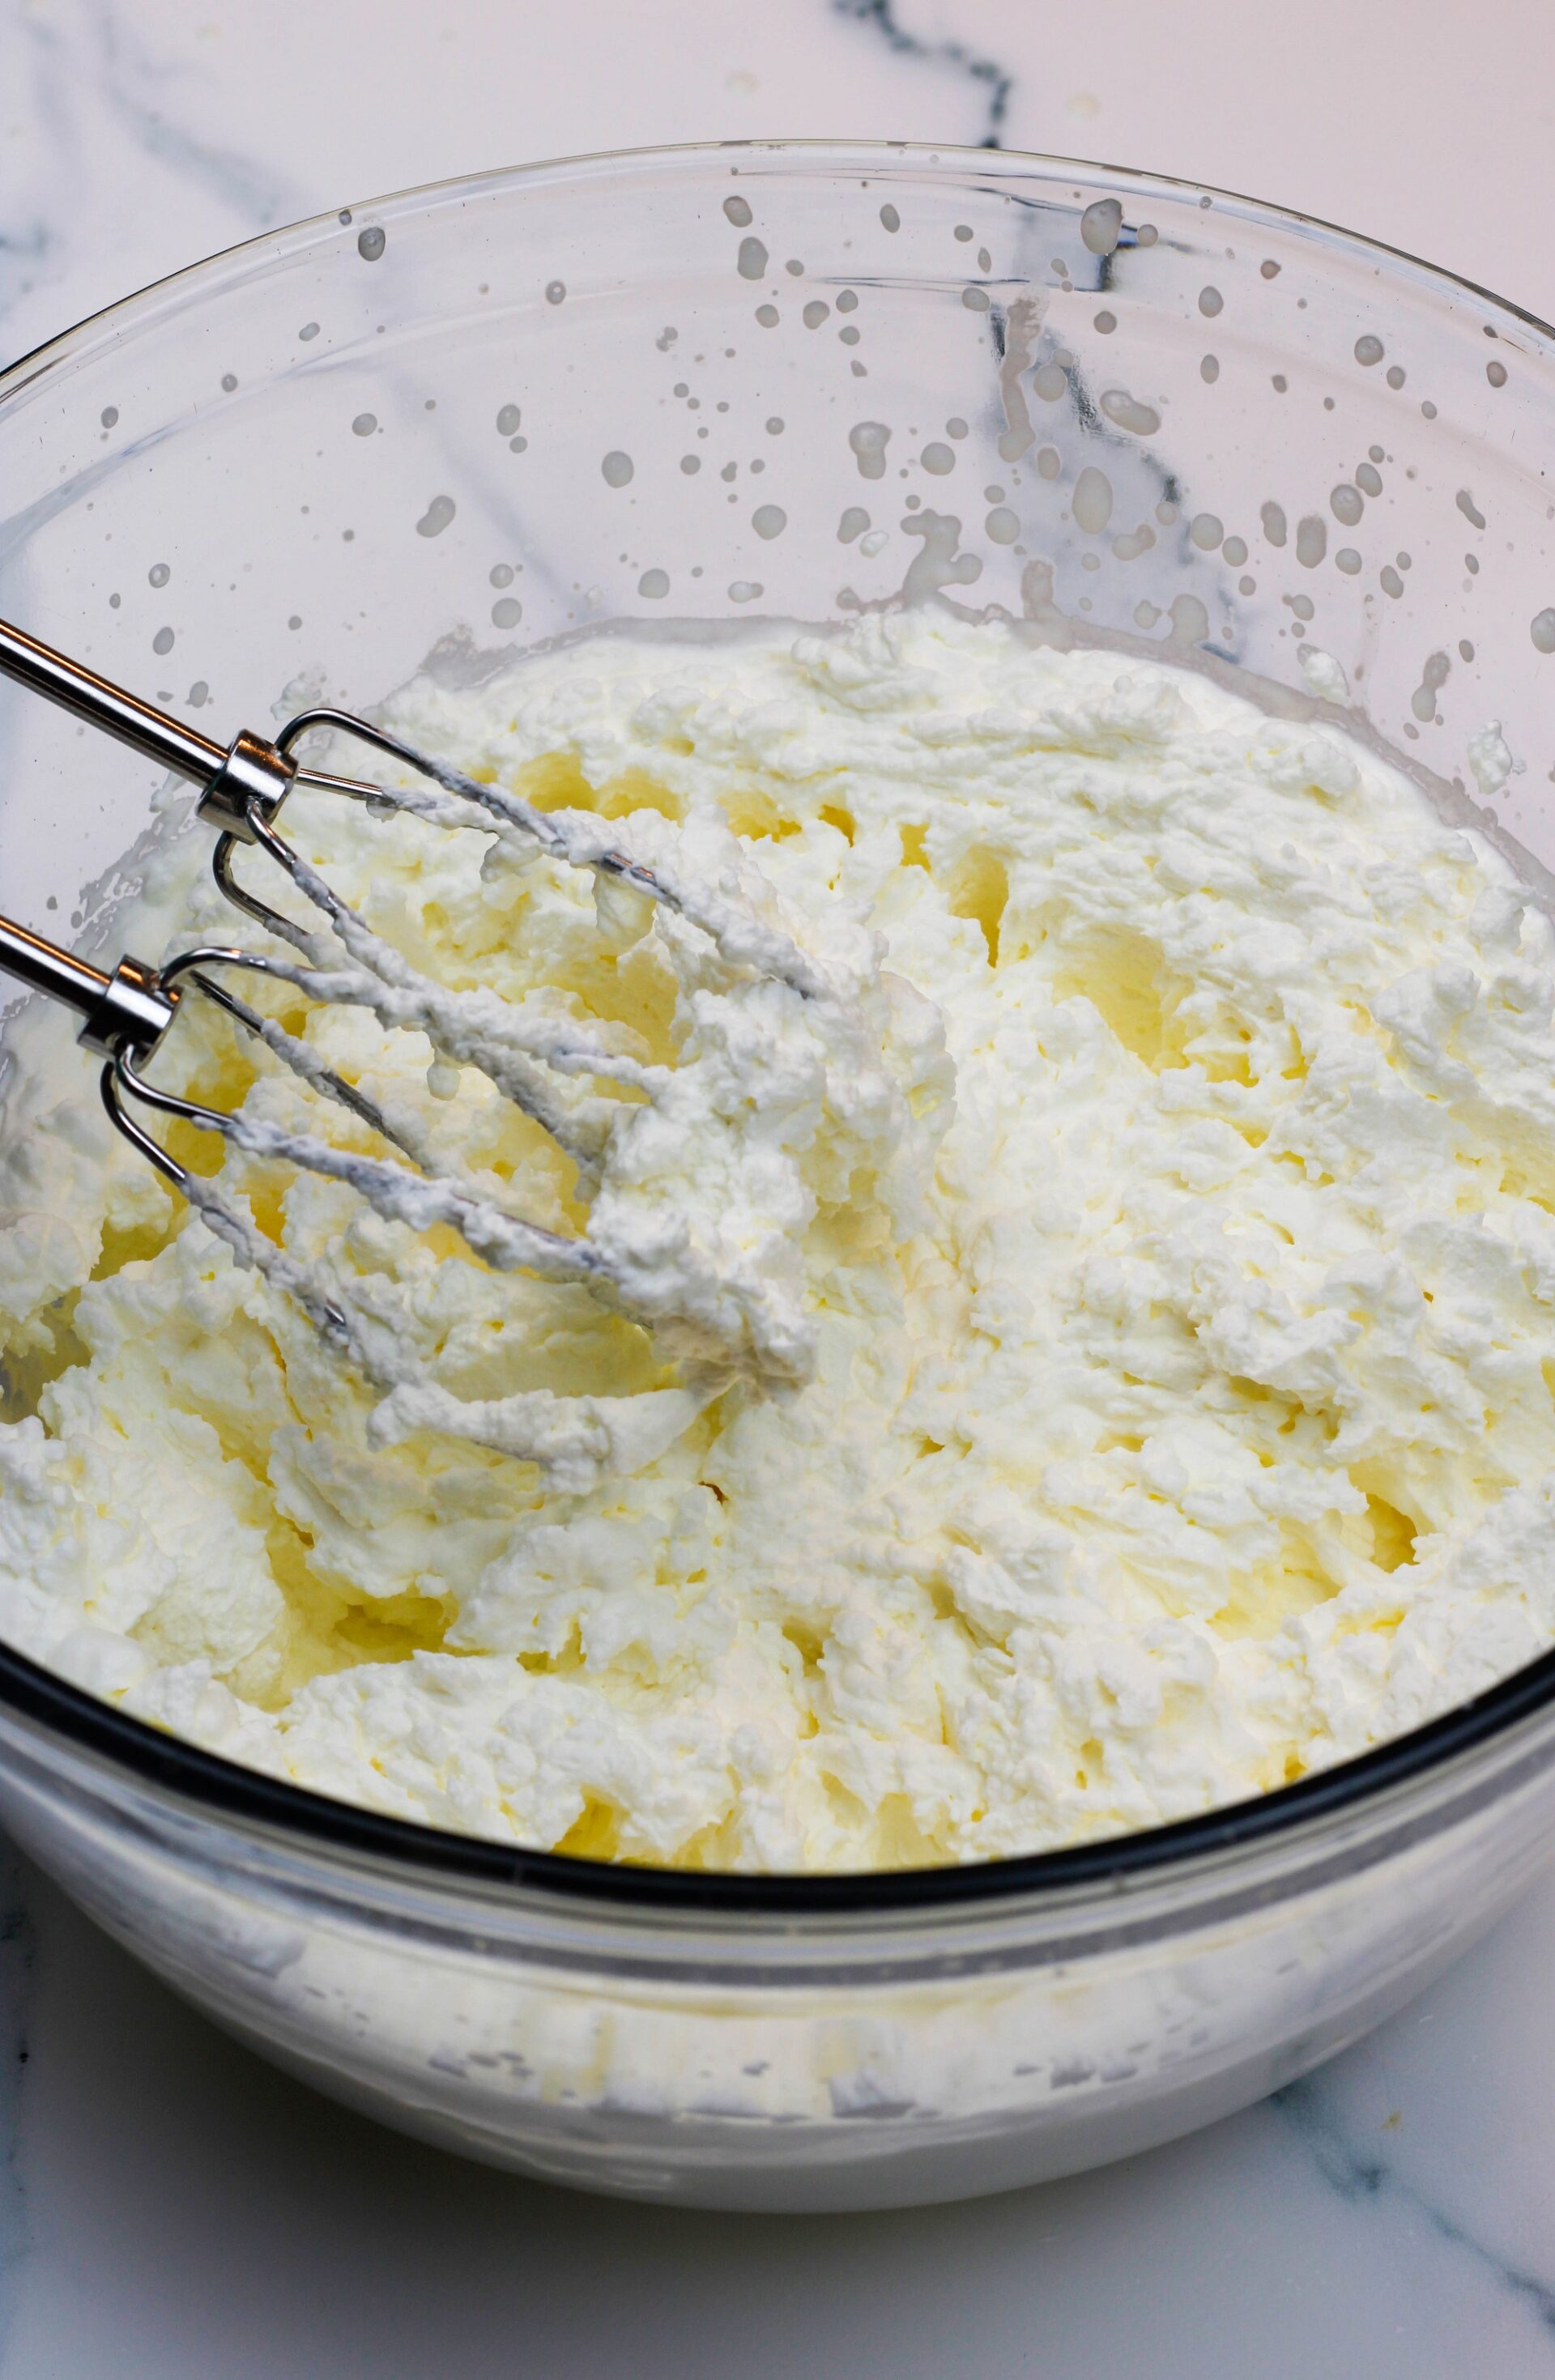 Whipping cream with a hand beater.